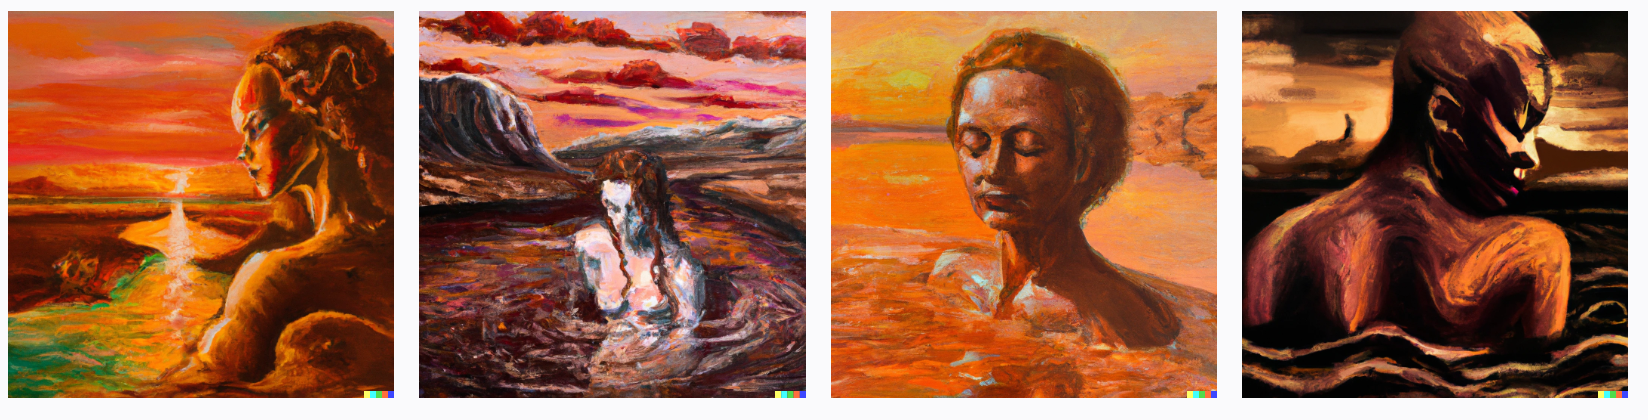 beatiful woman with a large bust bathes in the Martian river at sunset, oil painting, digital art